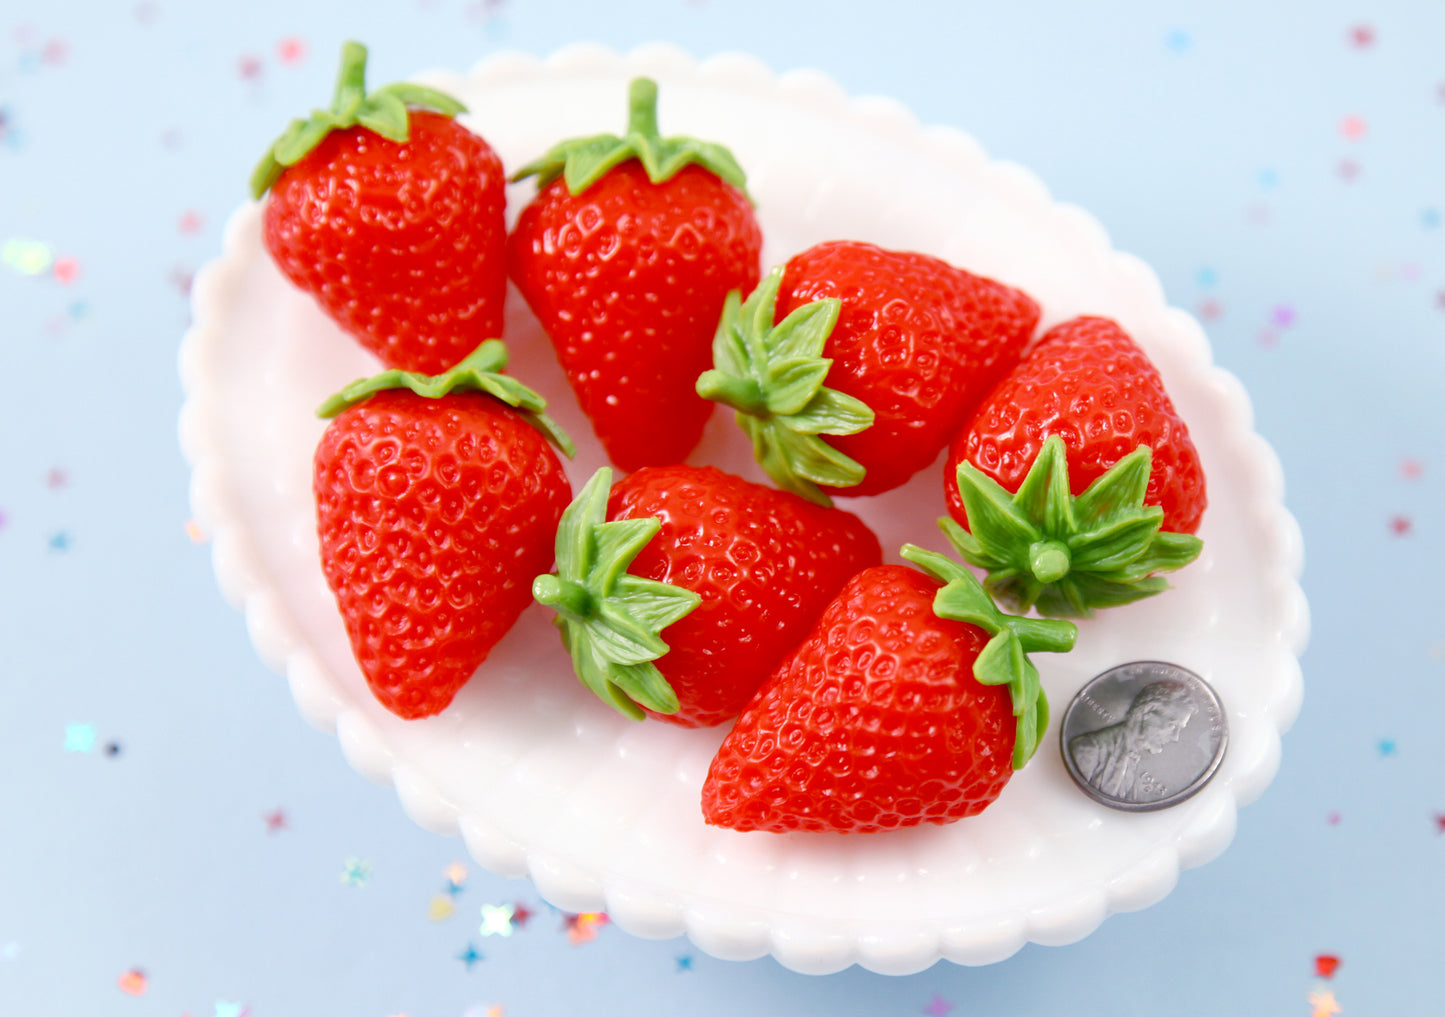 Fake Strawberry - 40mm Super Realistic Fake Strawberries Soft Silicone Strawberry or Resin Cabochons - 2 pc set